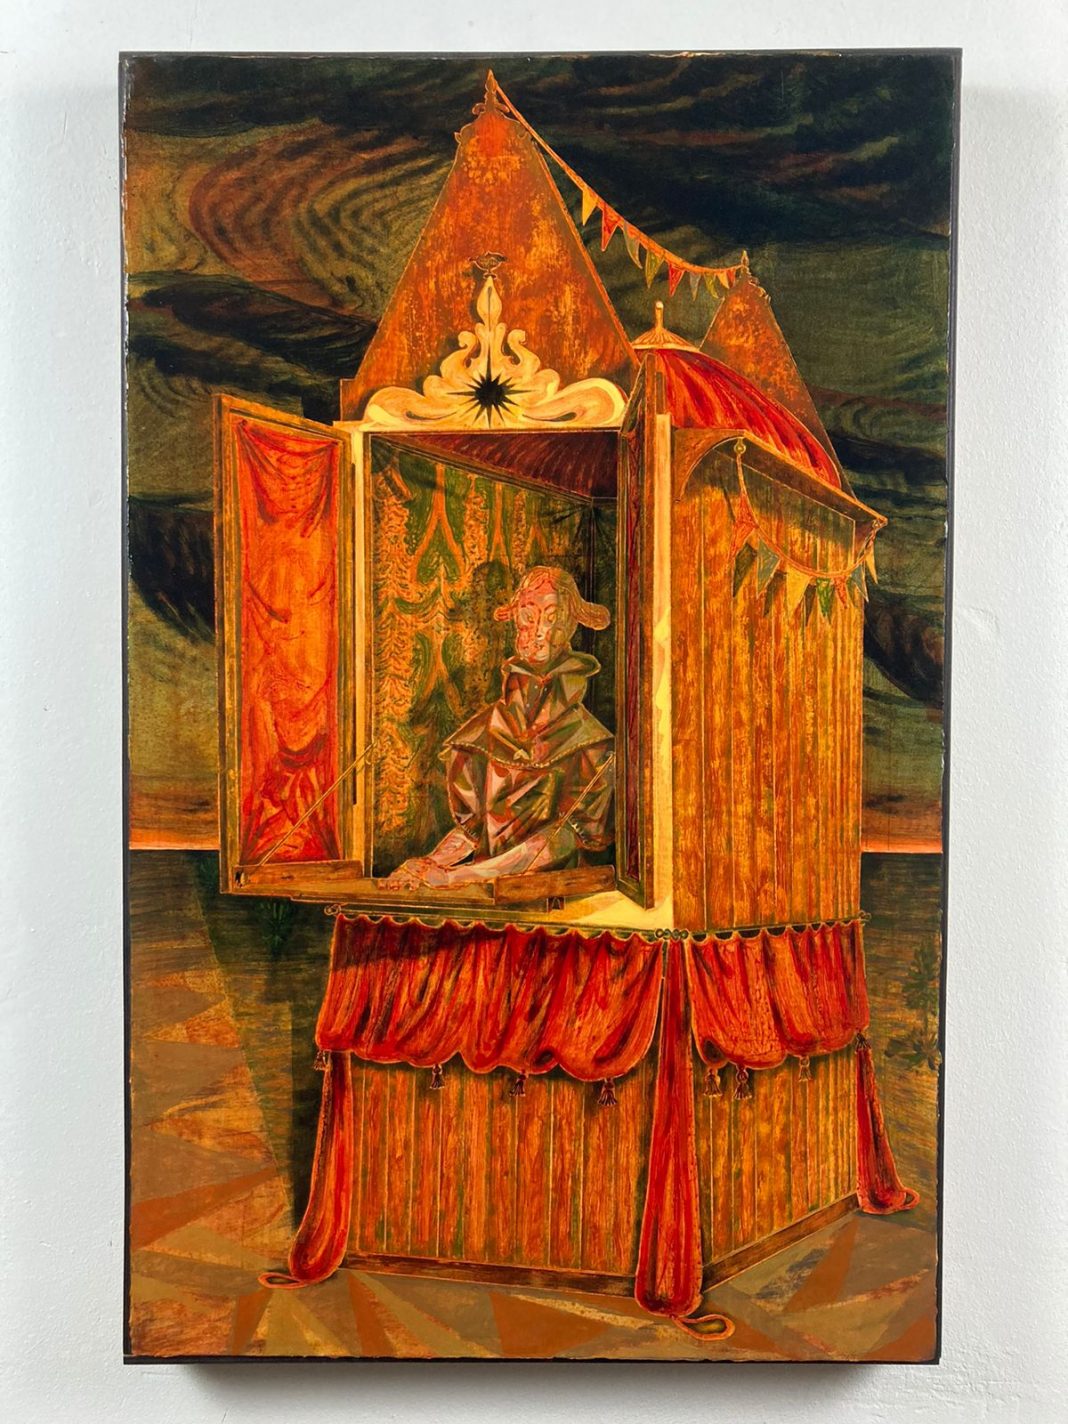 In Conversation #3 – Dora Economou / Andrei Pokrovskiihttps://www.exibart.com/repository/media/formidable/11/img/16b/Andrei-Pokrovskii-Ticket-Booth-and-Help-Yourself-2023-acrylic-and-oil-on-panel-cm-80x50-1068x1424.jpg